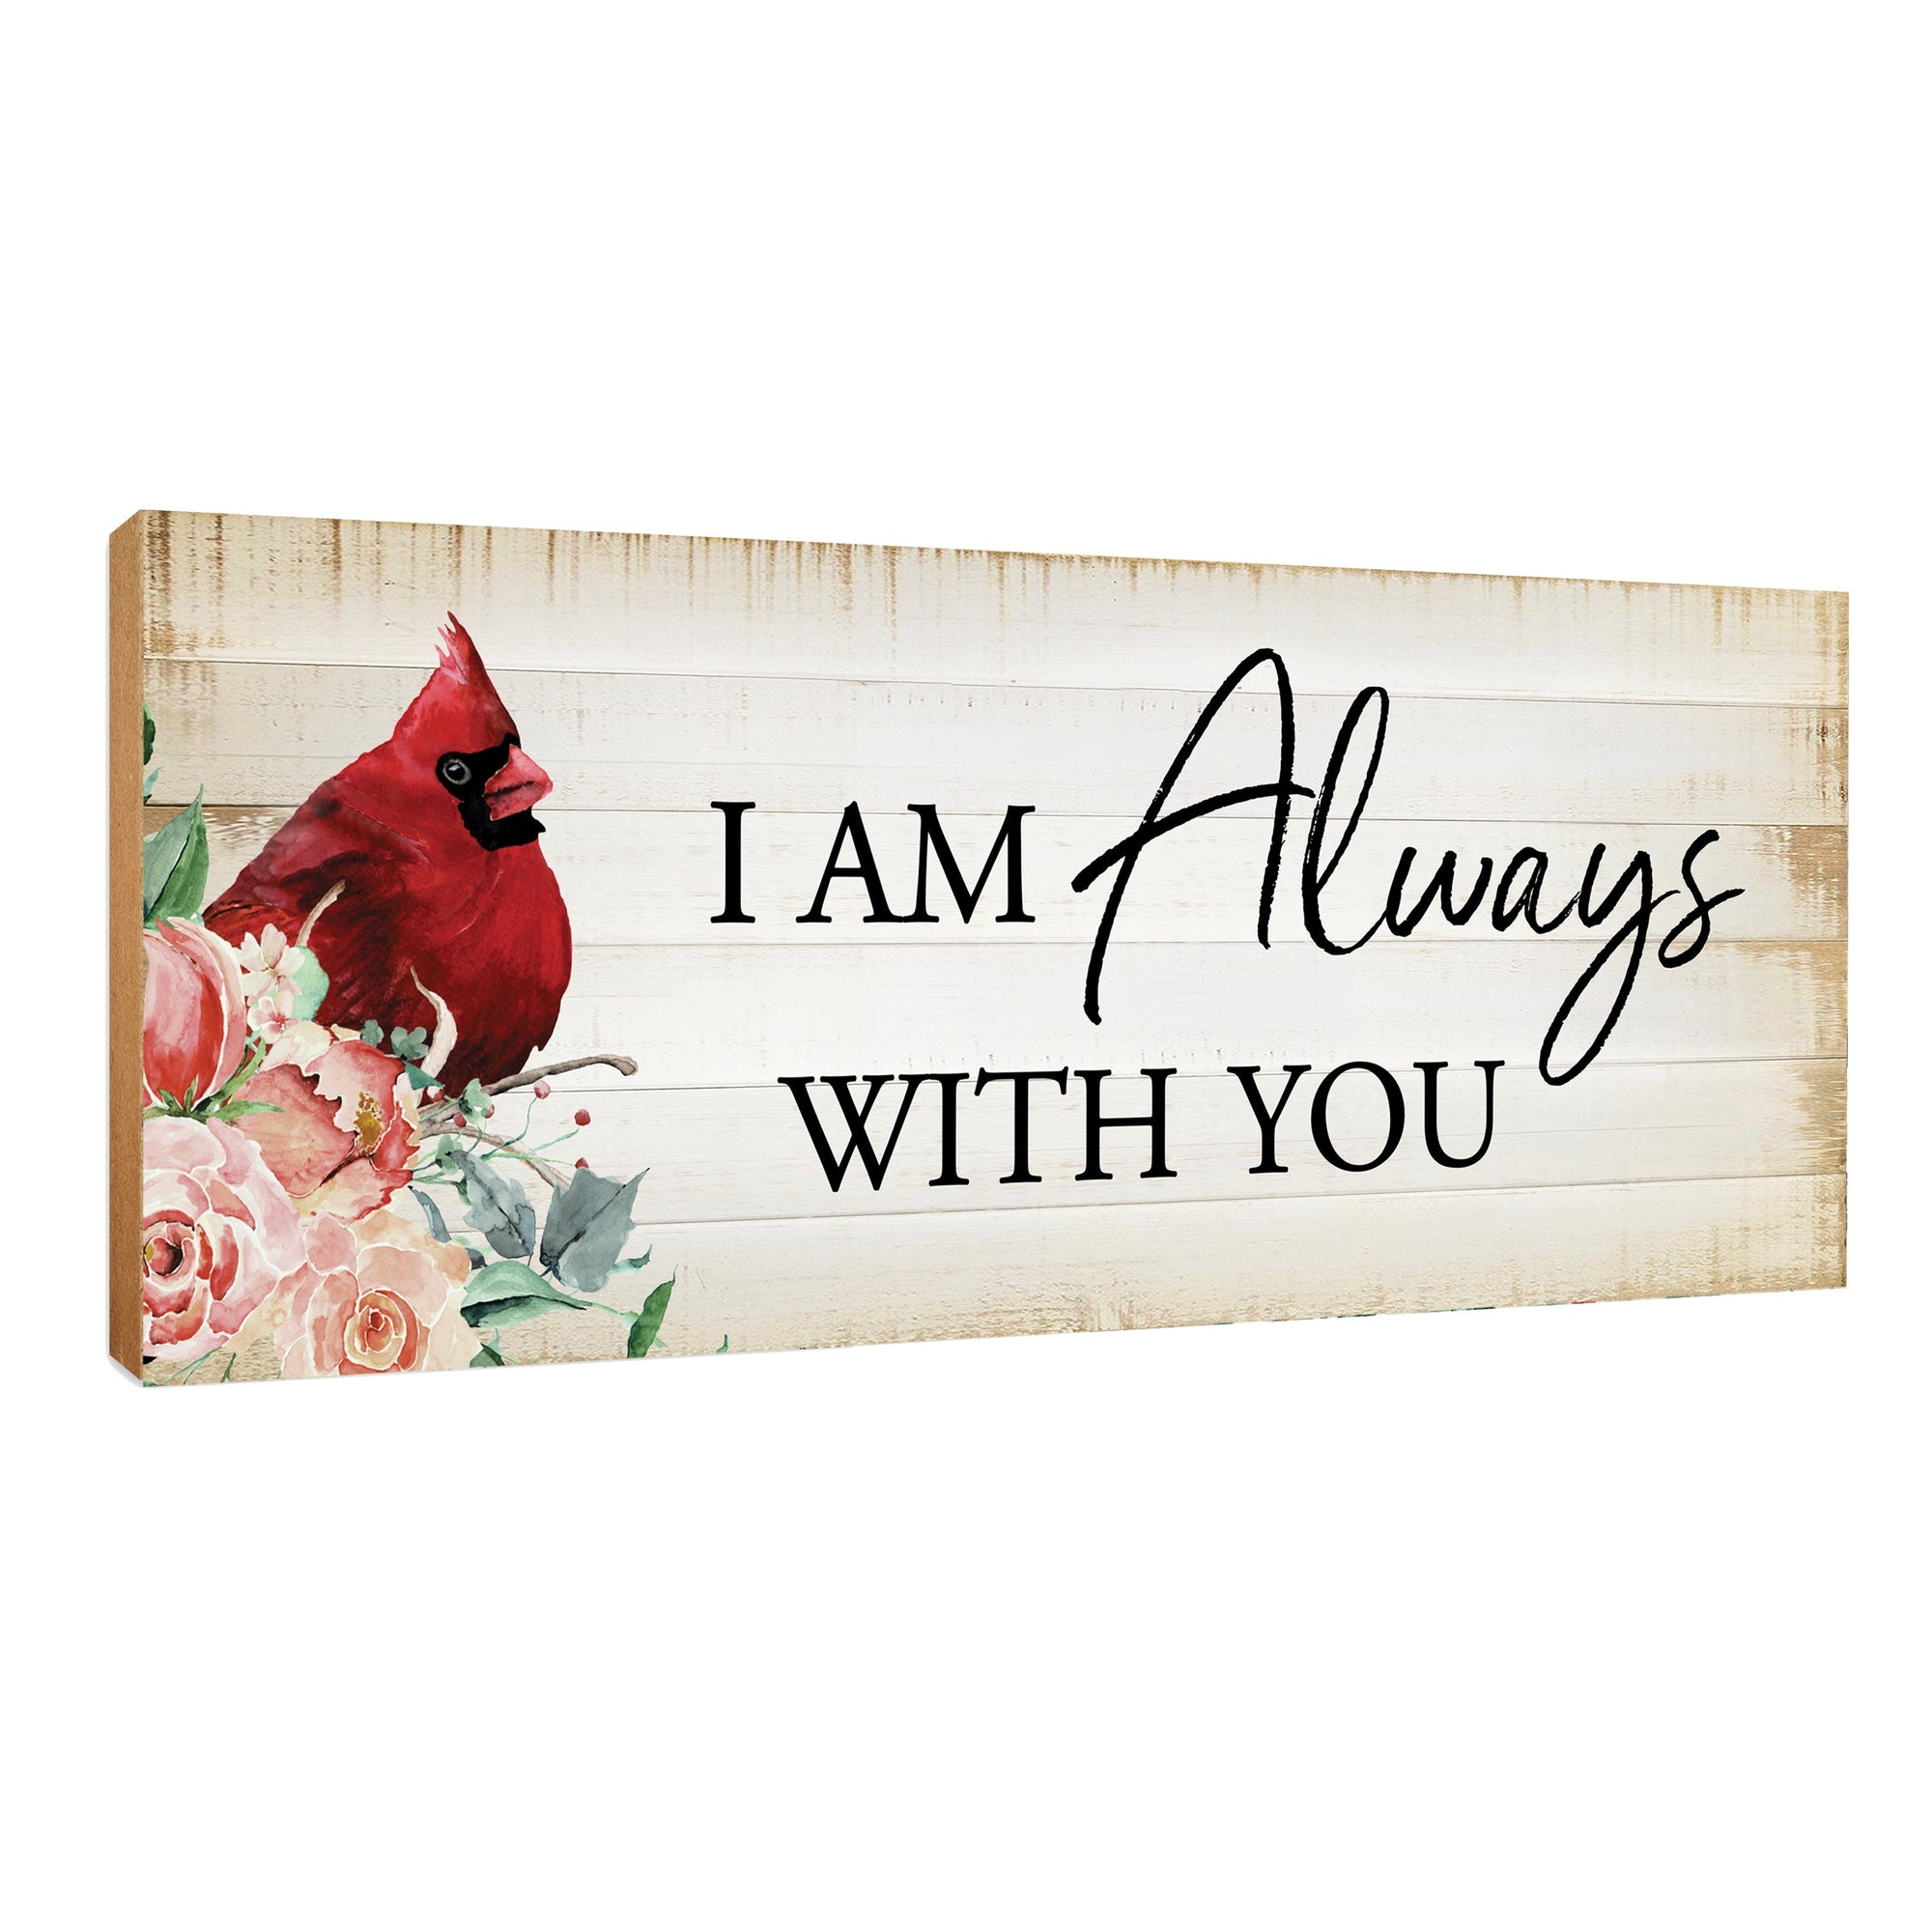 Wooden memorial shelf decor and tabletop signs, thoughtful memorial gifts for those grieving the loss of a loved one.